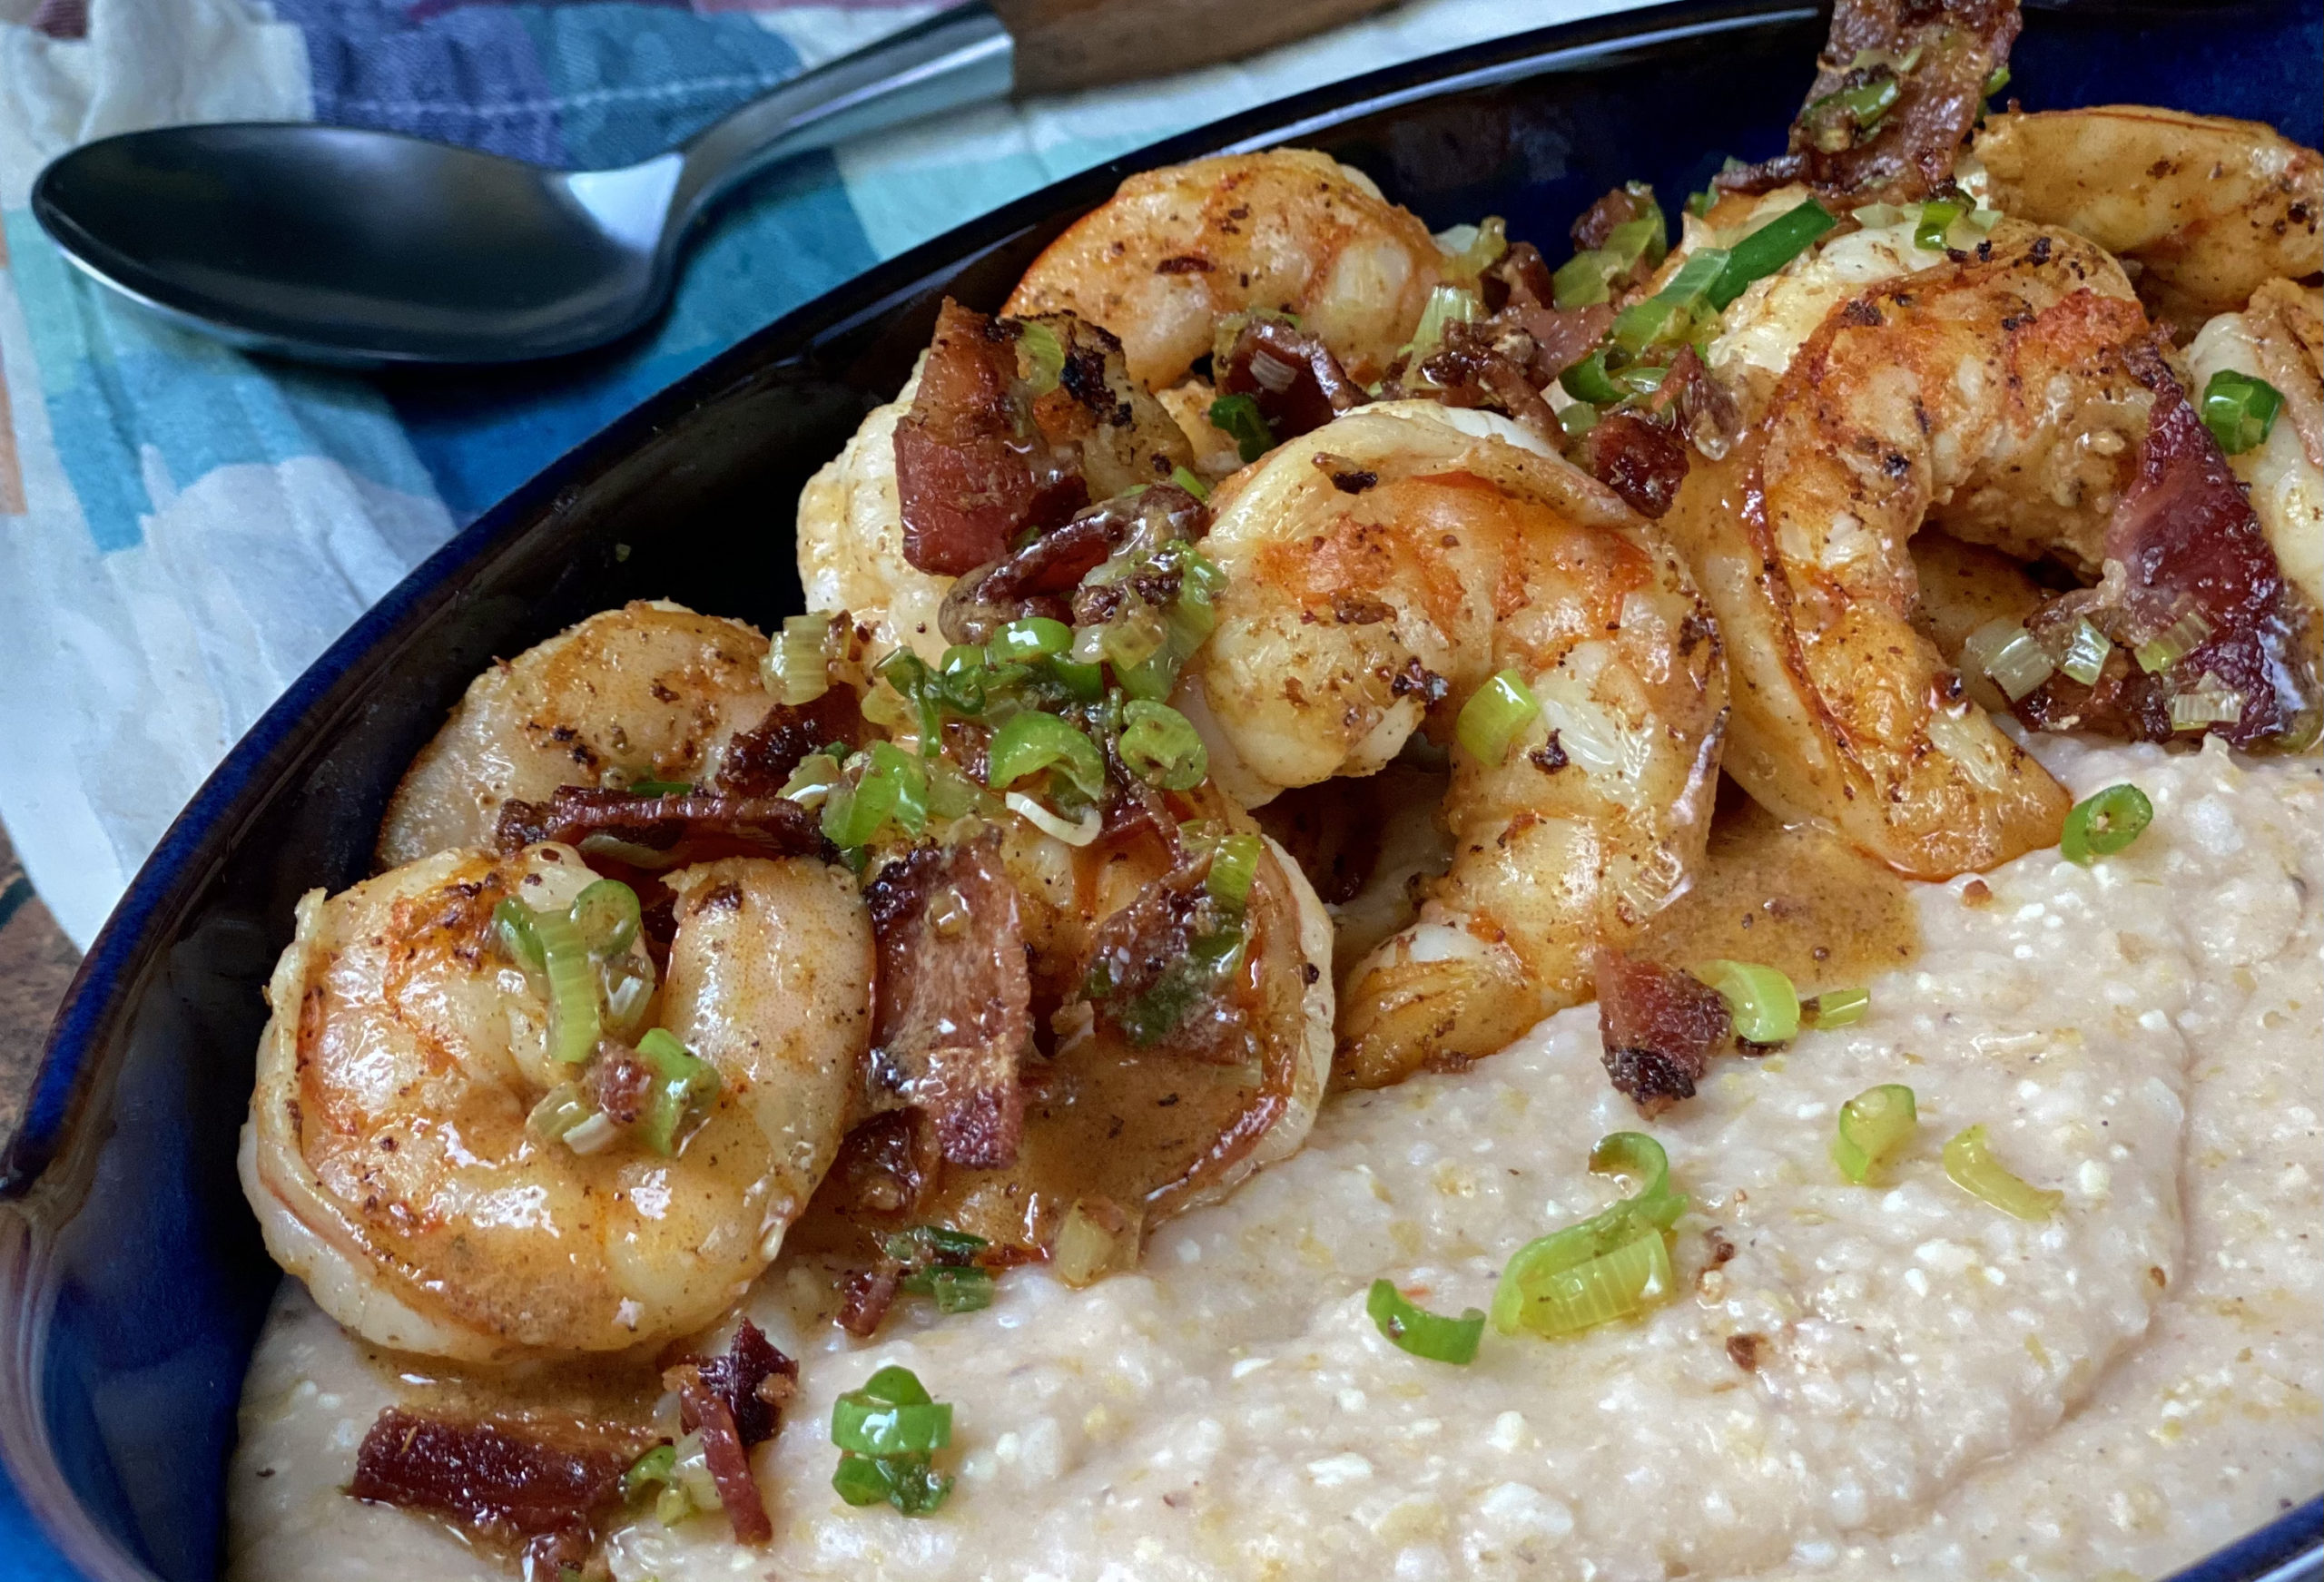 Traditional Charleston-style shrimp and grits